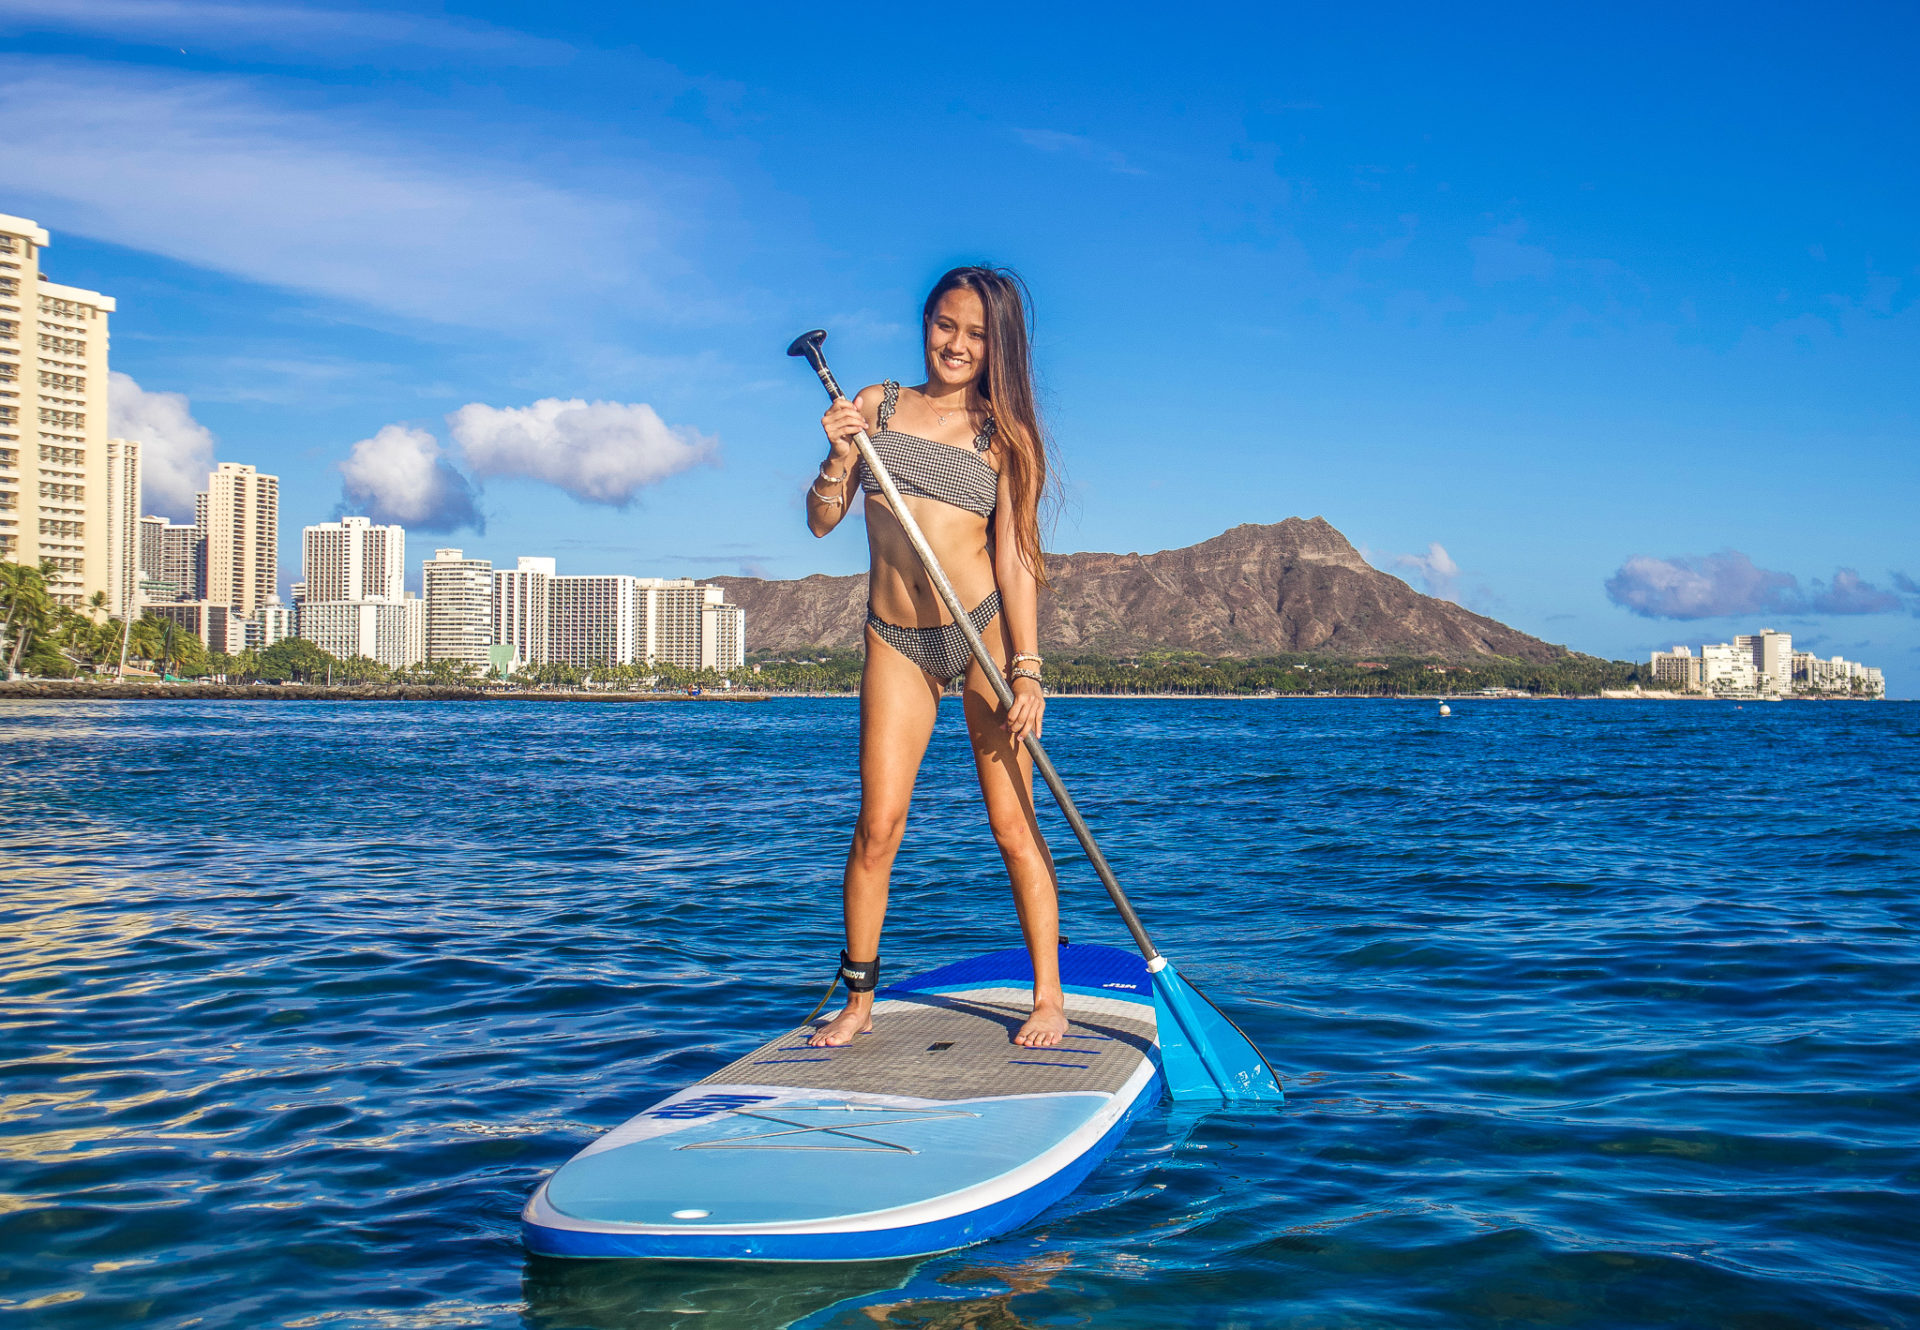 Paddle Boarding Captions and Quotes for Instagram